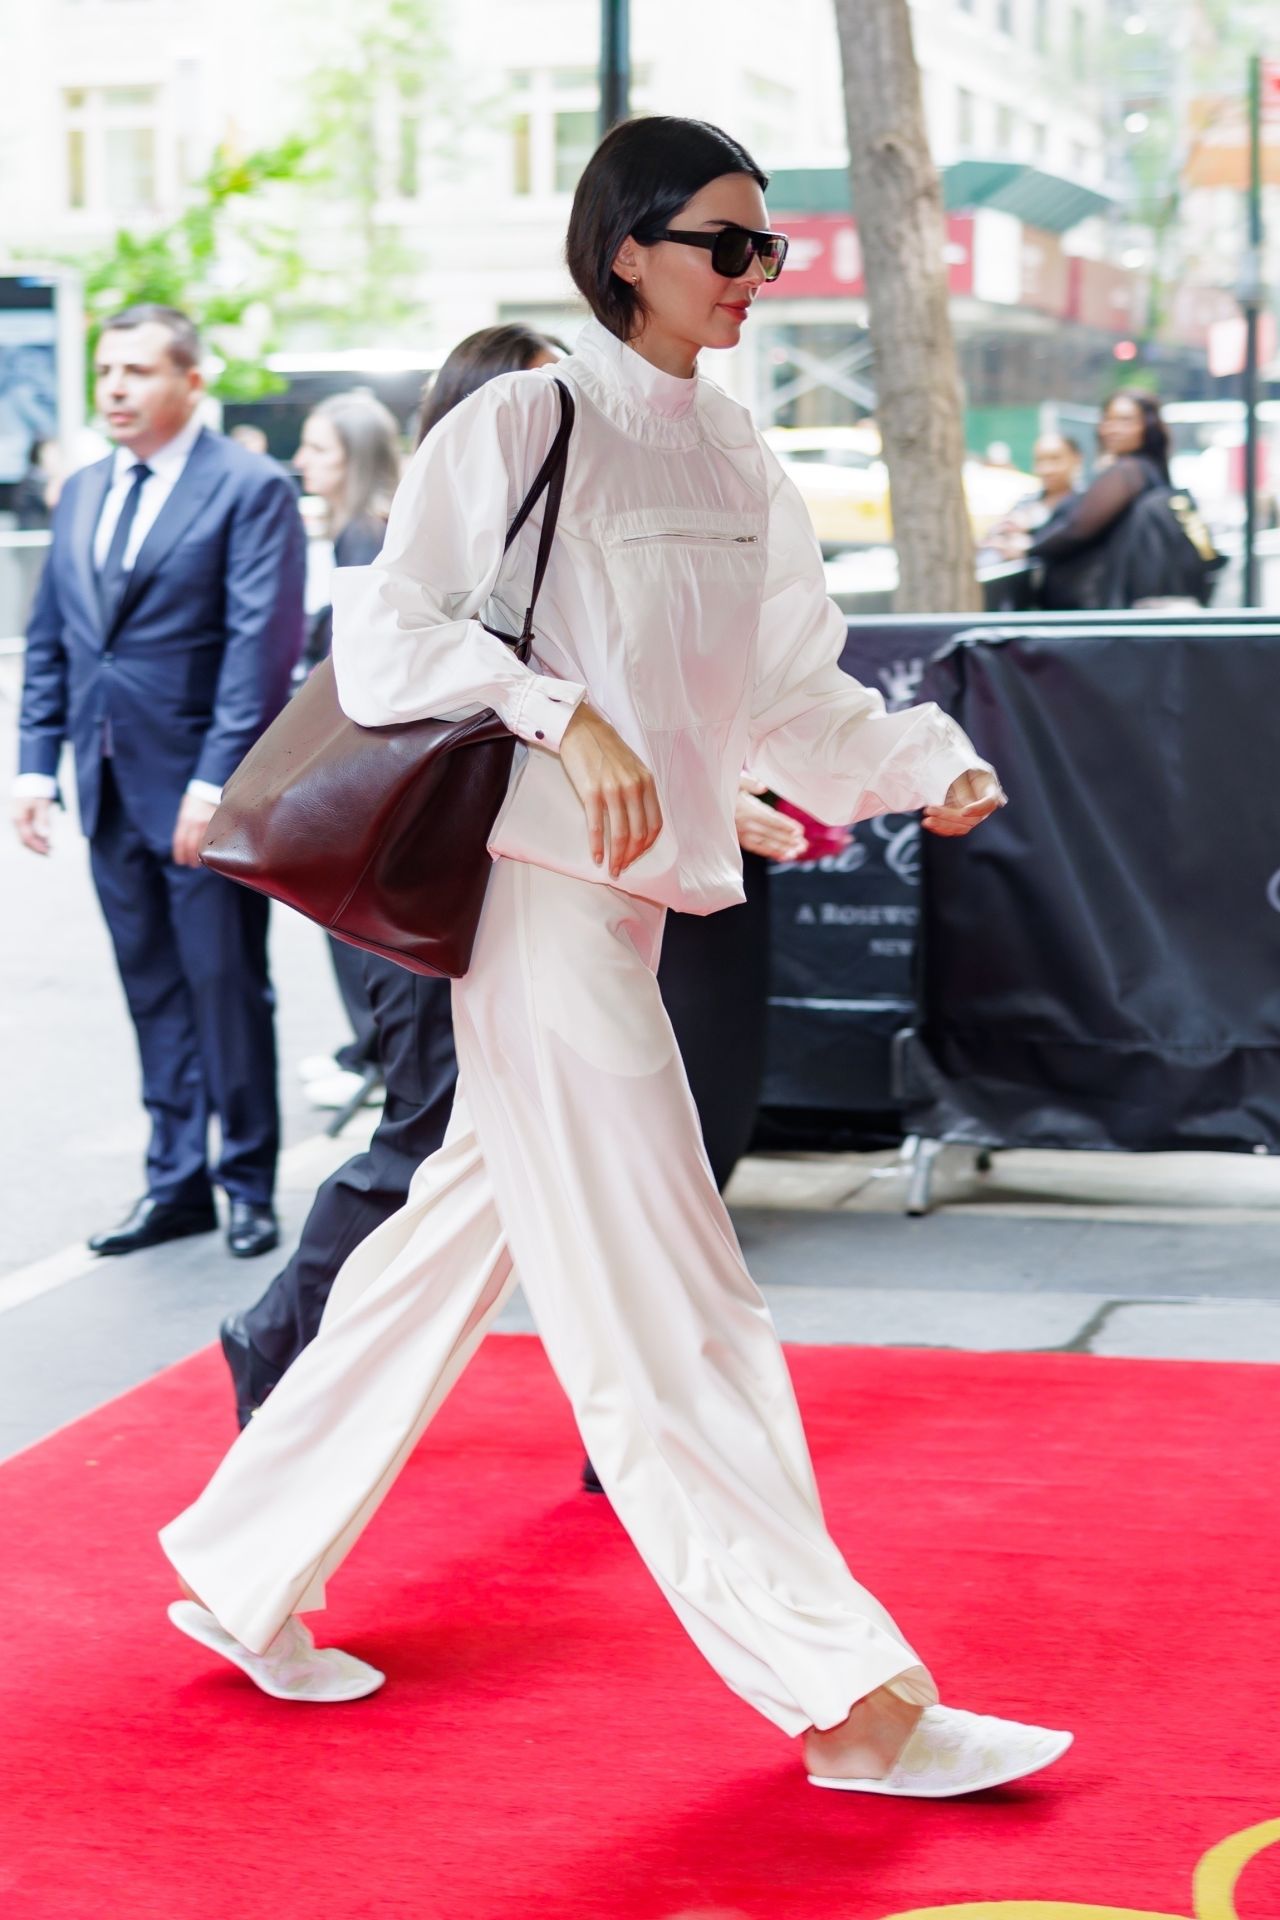 KENDALL JENNER ARRIVING AT CARLYLE HOTEL IN NEW YORK1